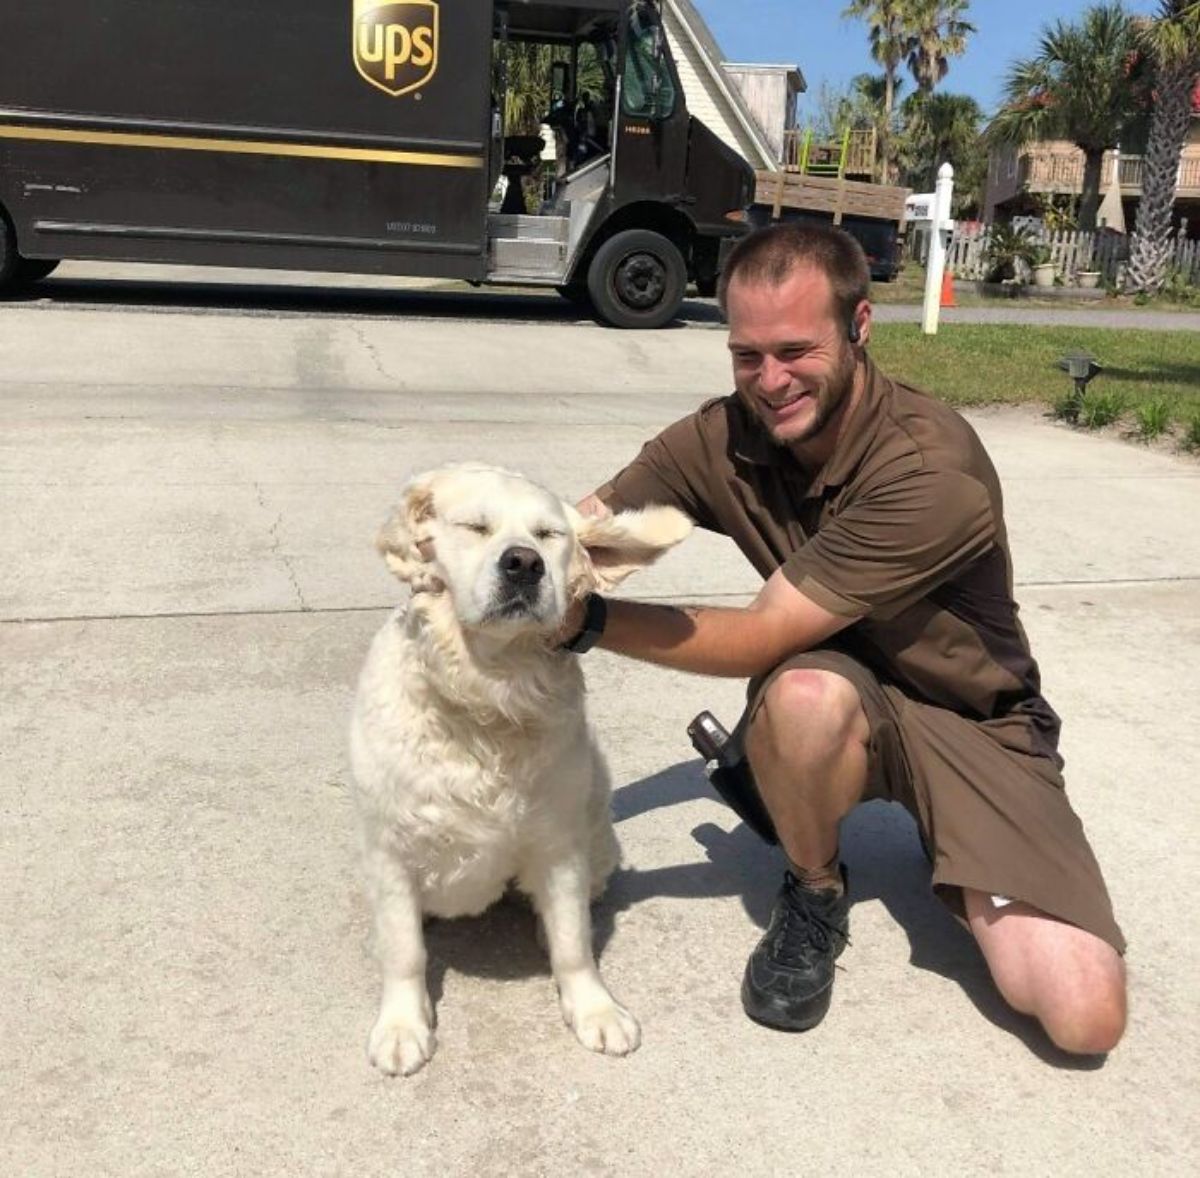 male ups driver kneeling on the ground and petting a labrador retriever